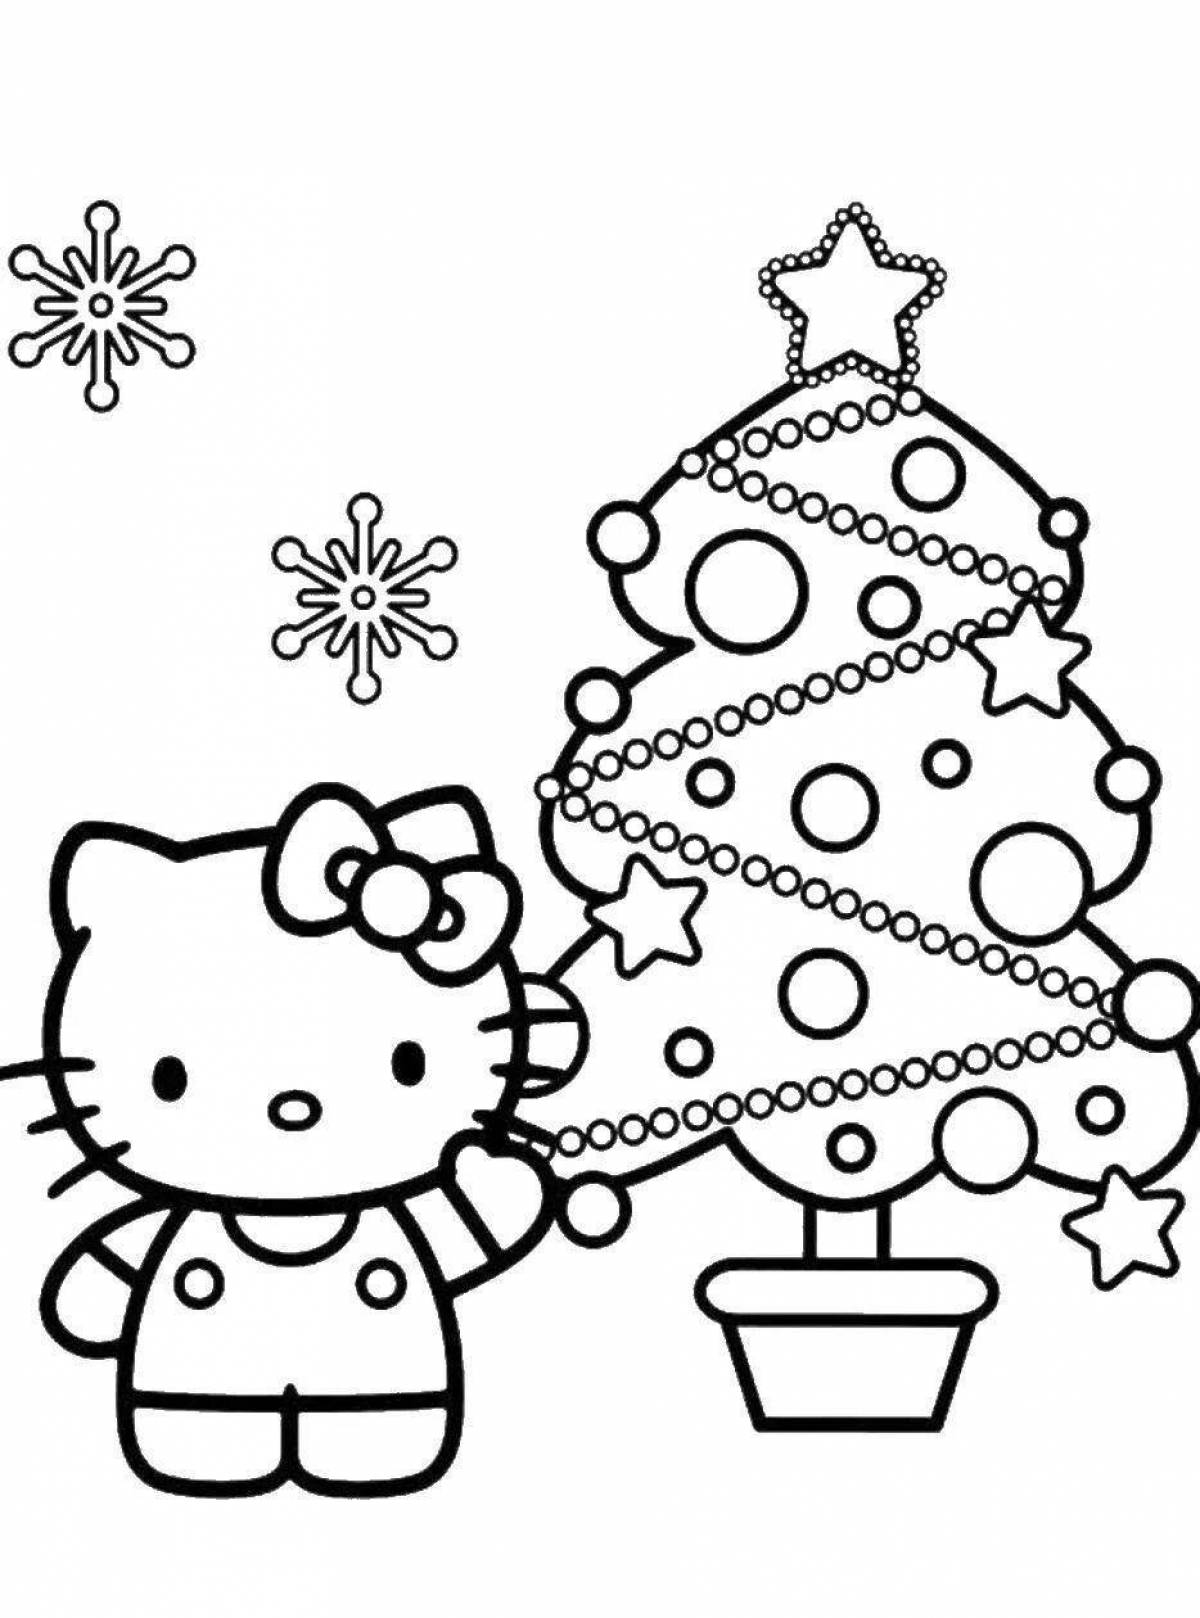 Live Christmas coloring book for girls 12 years old